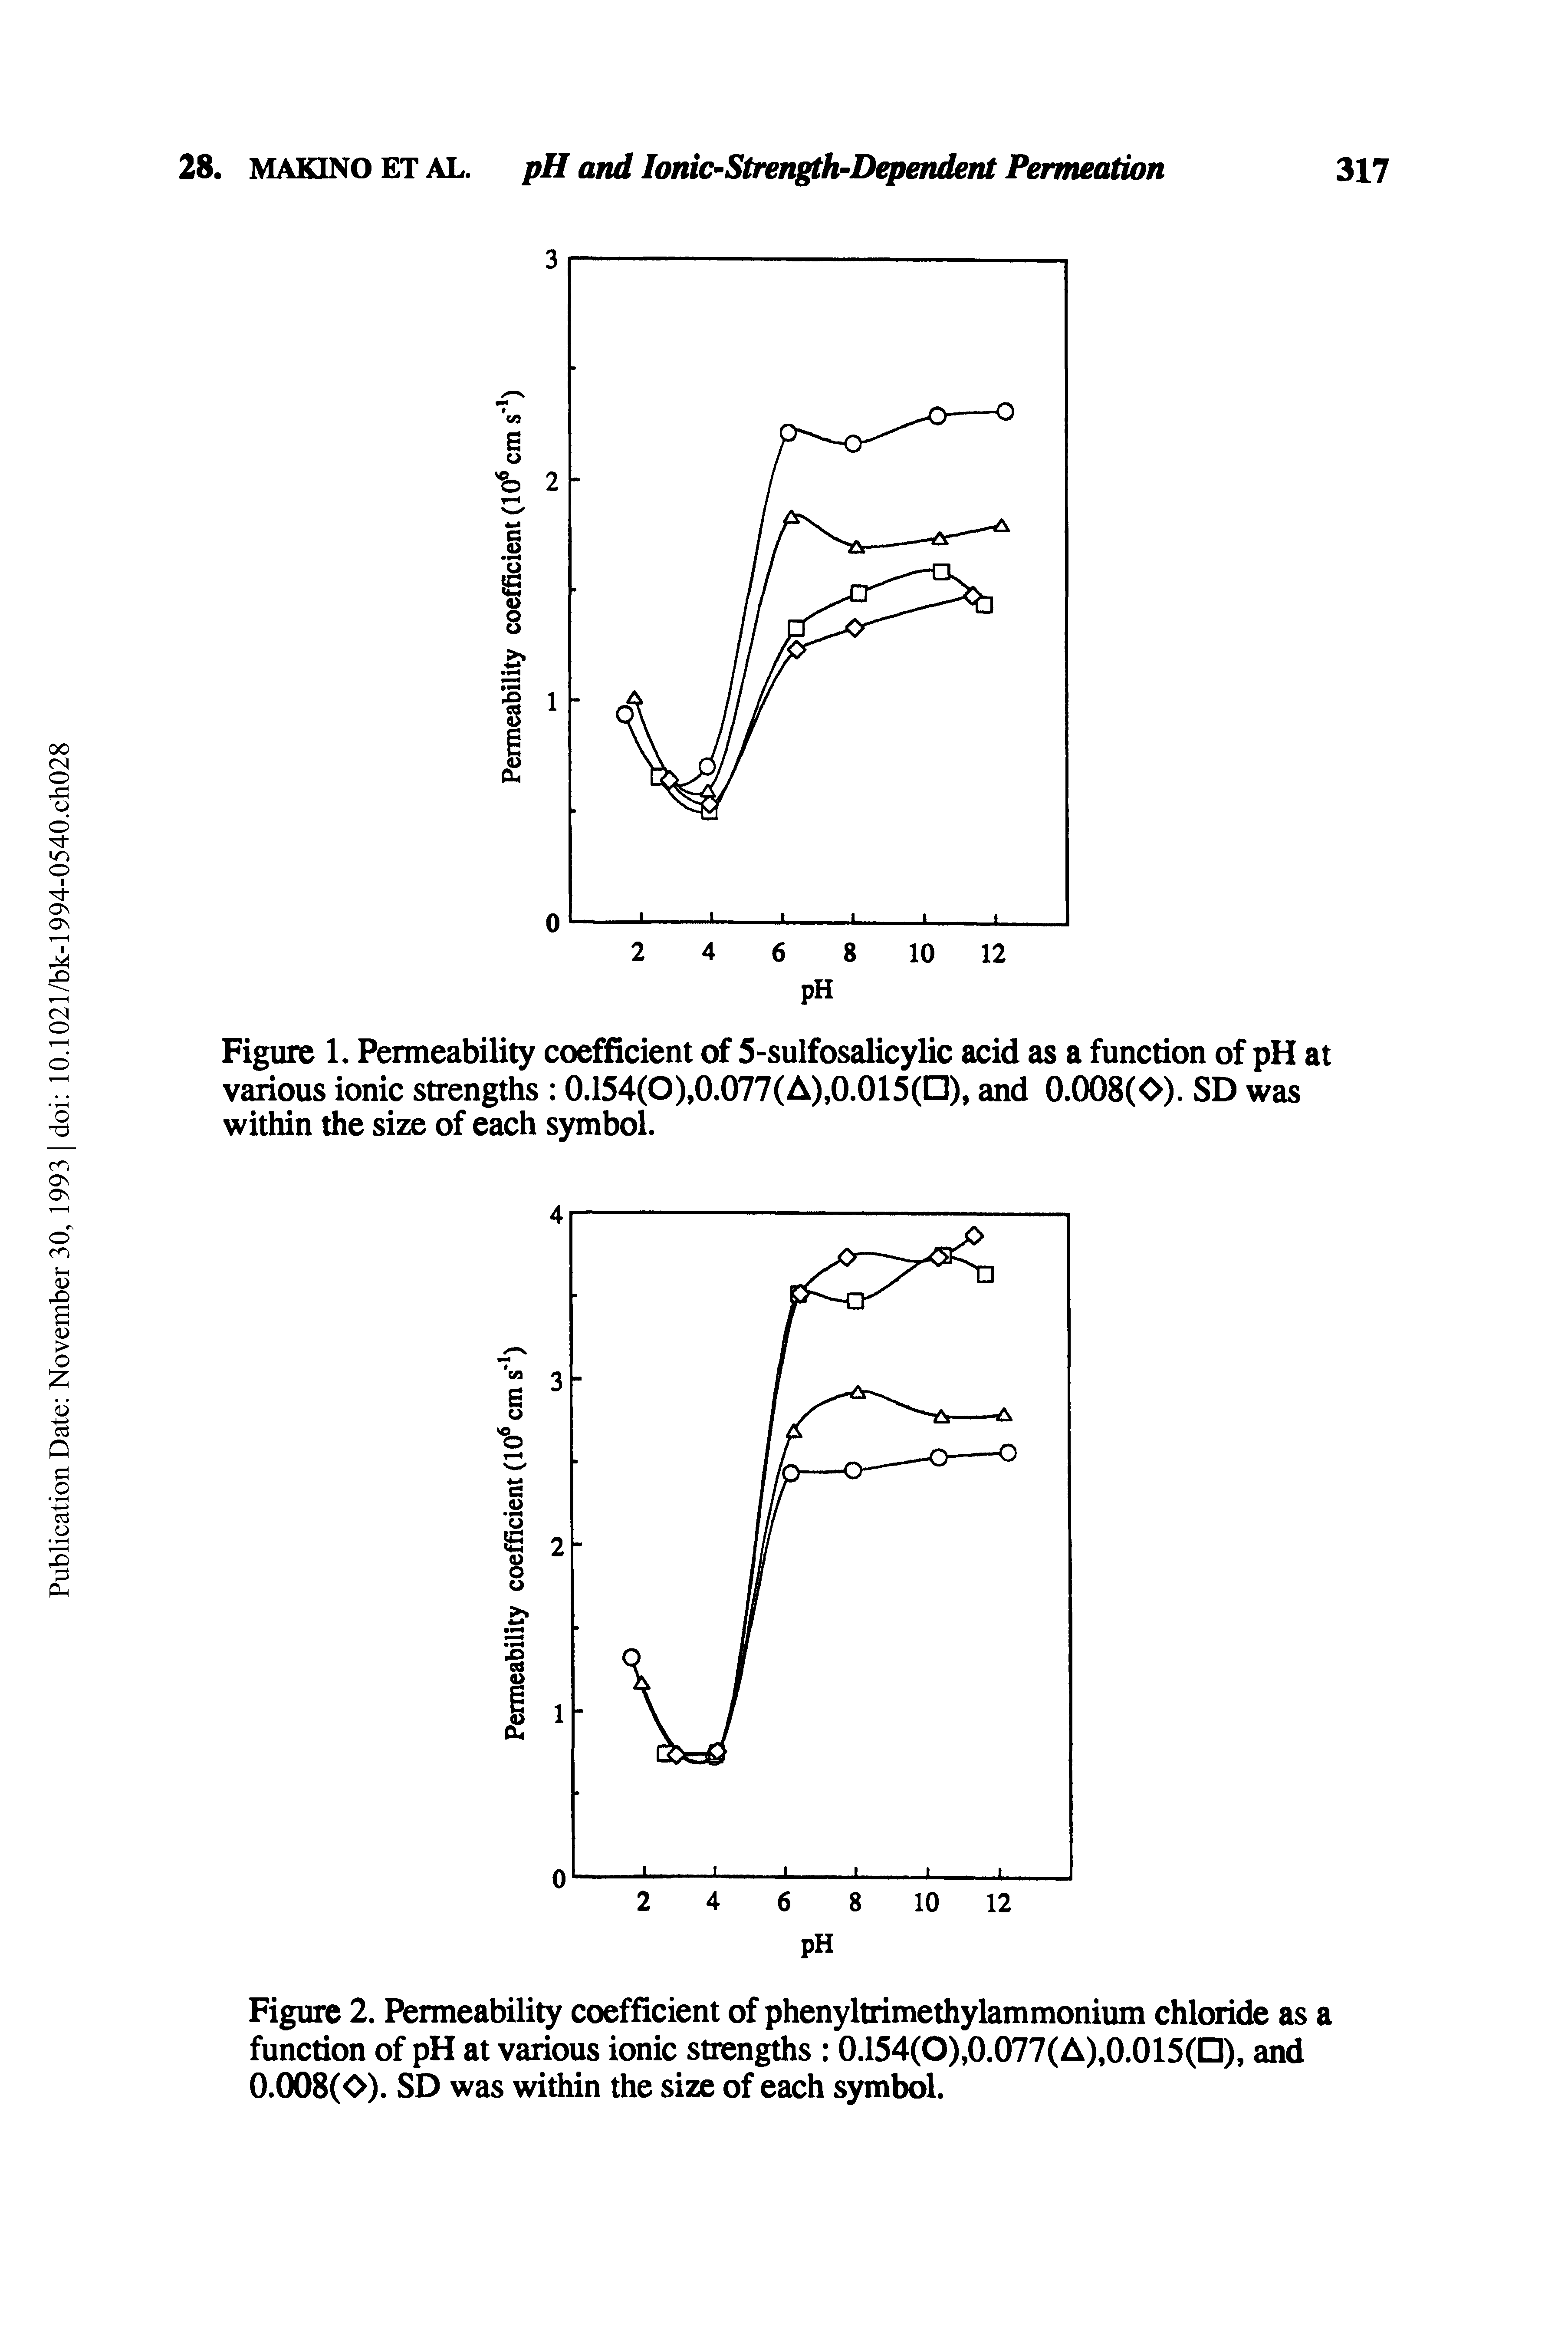 Figure 2. Permeability coefficient of phenyltrimethylammonitun chloride as a function of pH at various ionic stren s 0.154(0),0.077(A),0.015(D), and 0.008(0). SD was within the size of each symbol.